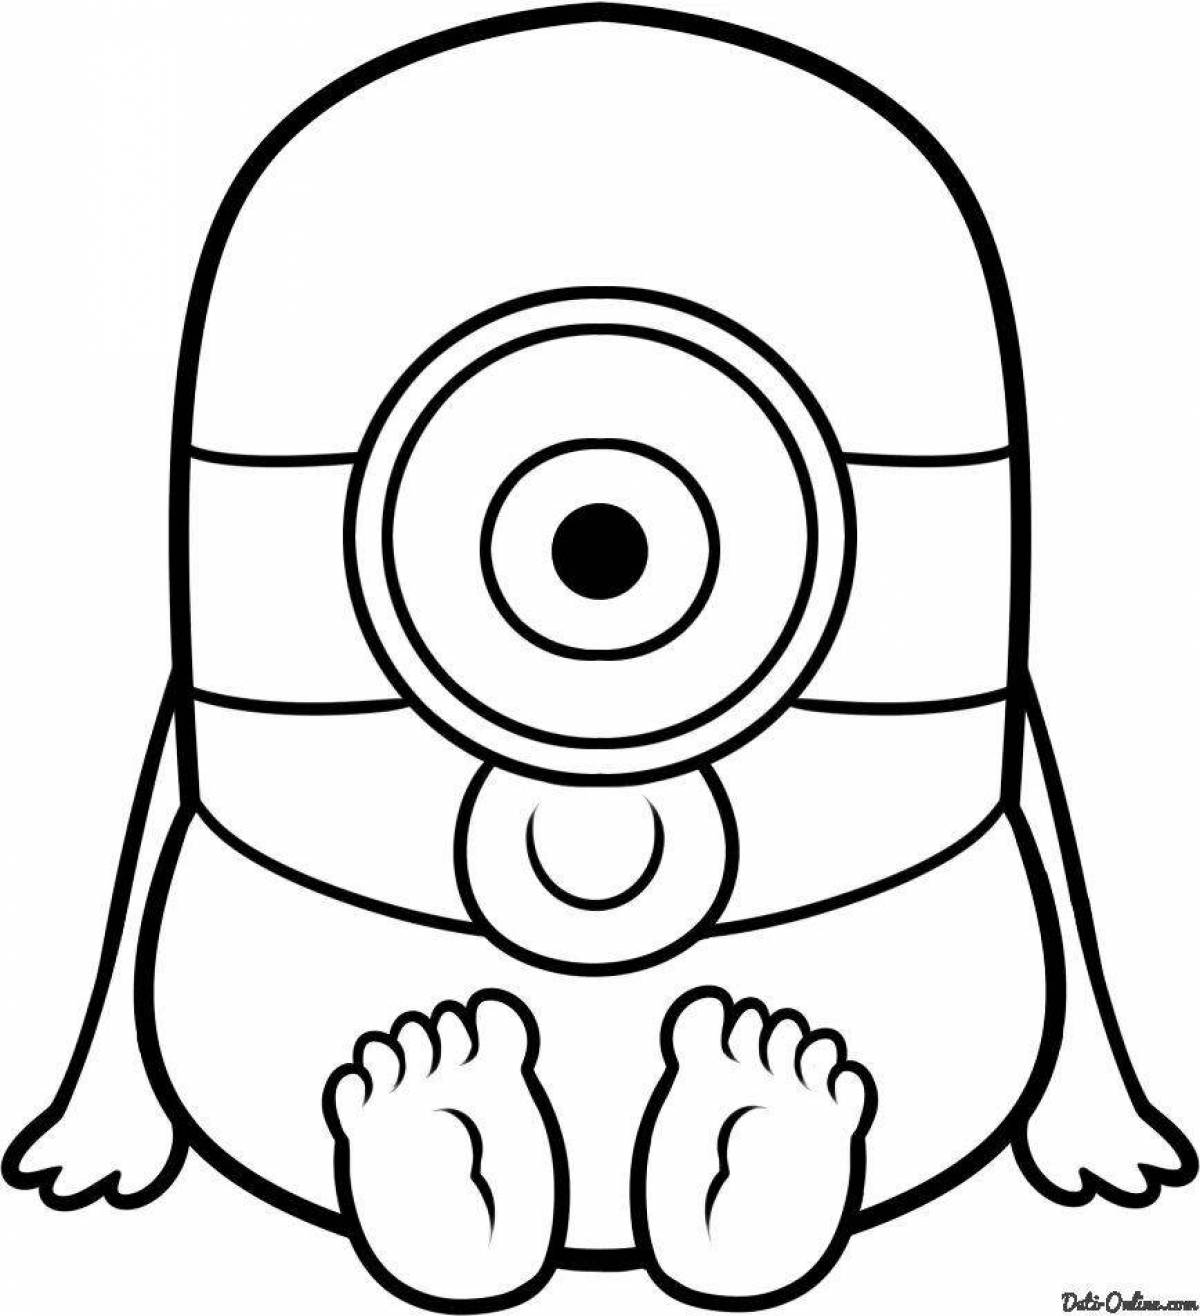 Incredible minion coloring book for kids